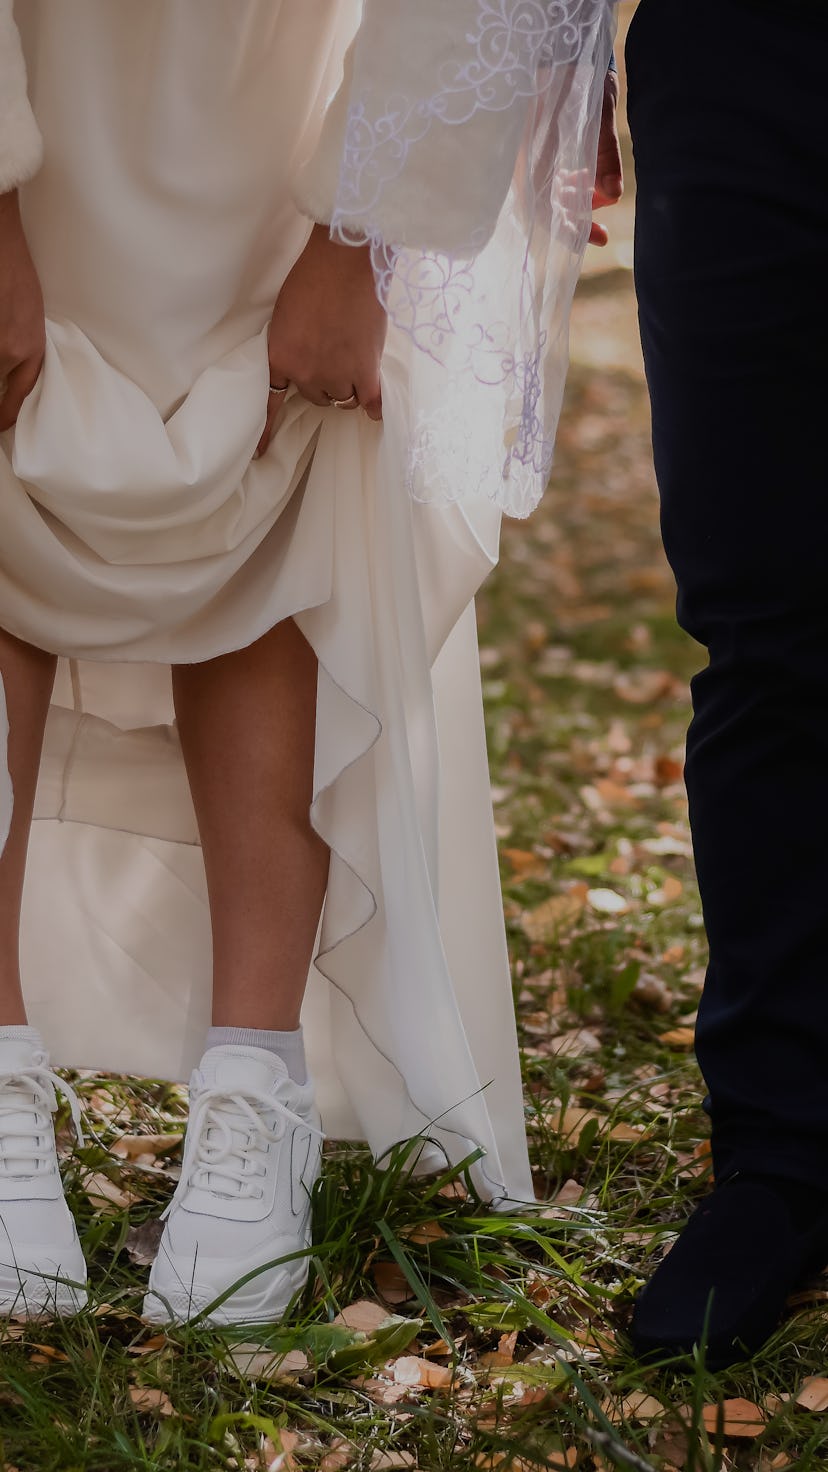 the bride and groom with a bouquet of flowers in fall in the park. the bride lifted her skirt, showi...